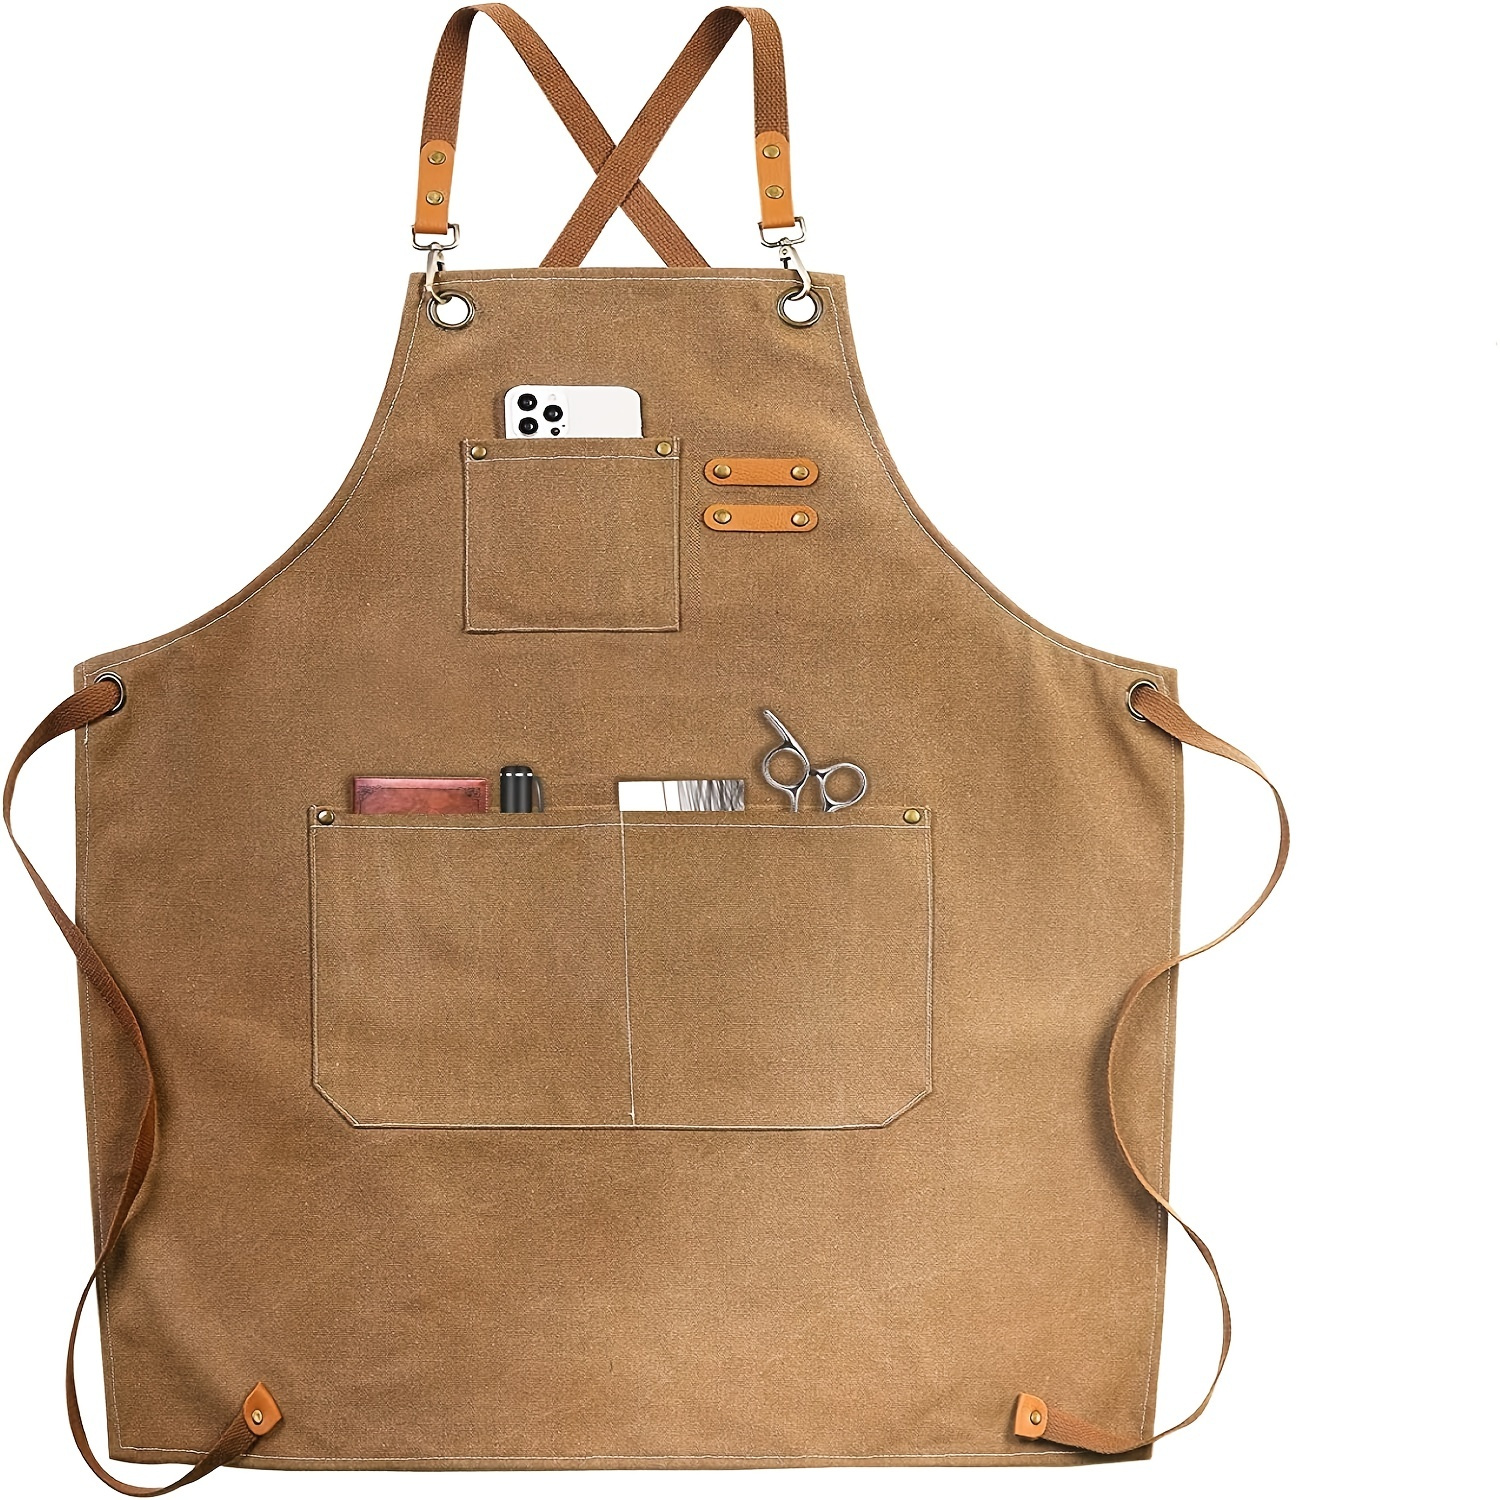 

1pc Cotton Canvas Cross Back Apron For Art Painting & Gardening, Apron With 3 Pockets, Waterproof, Adjustable